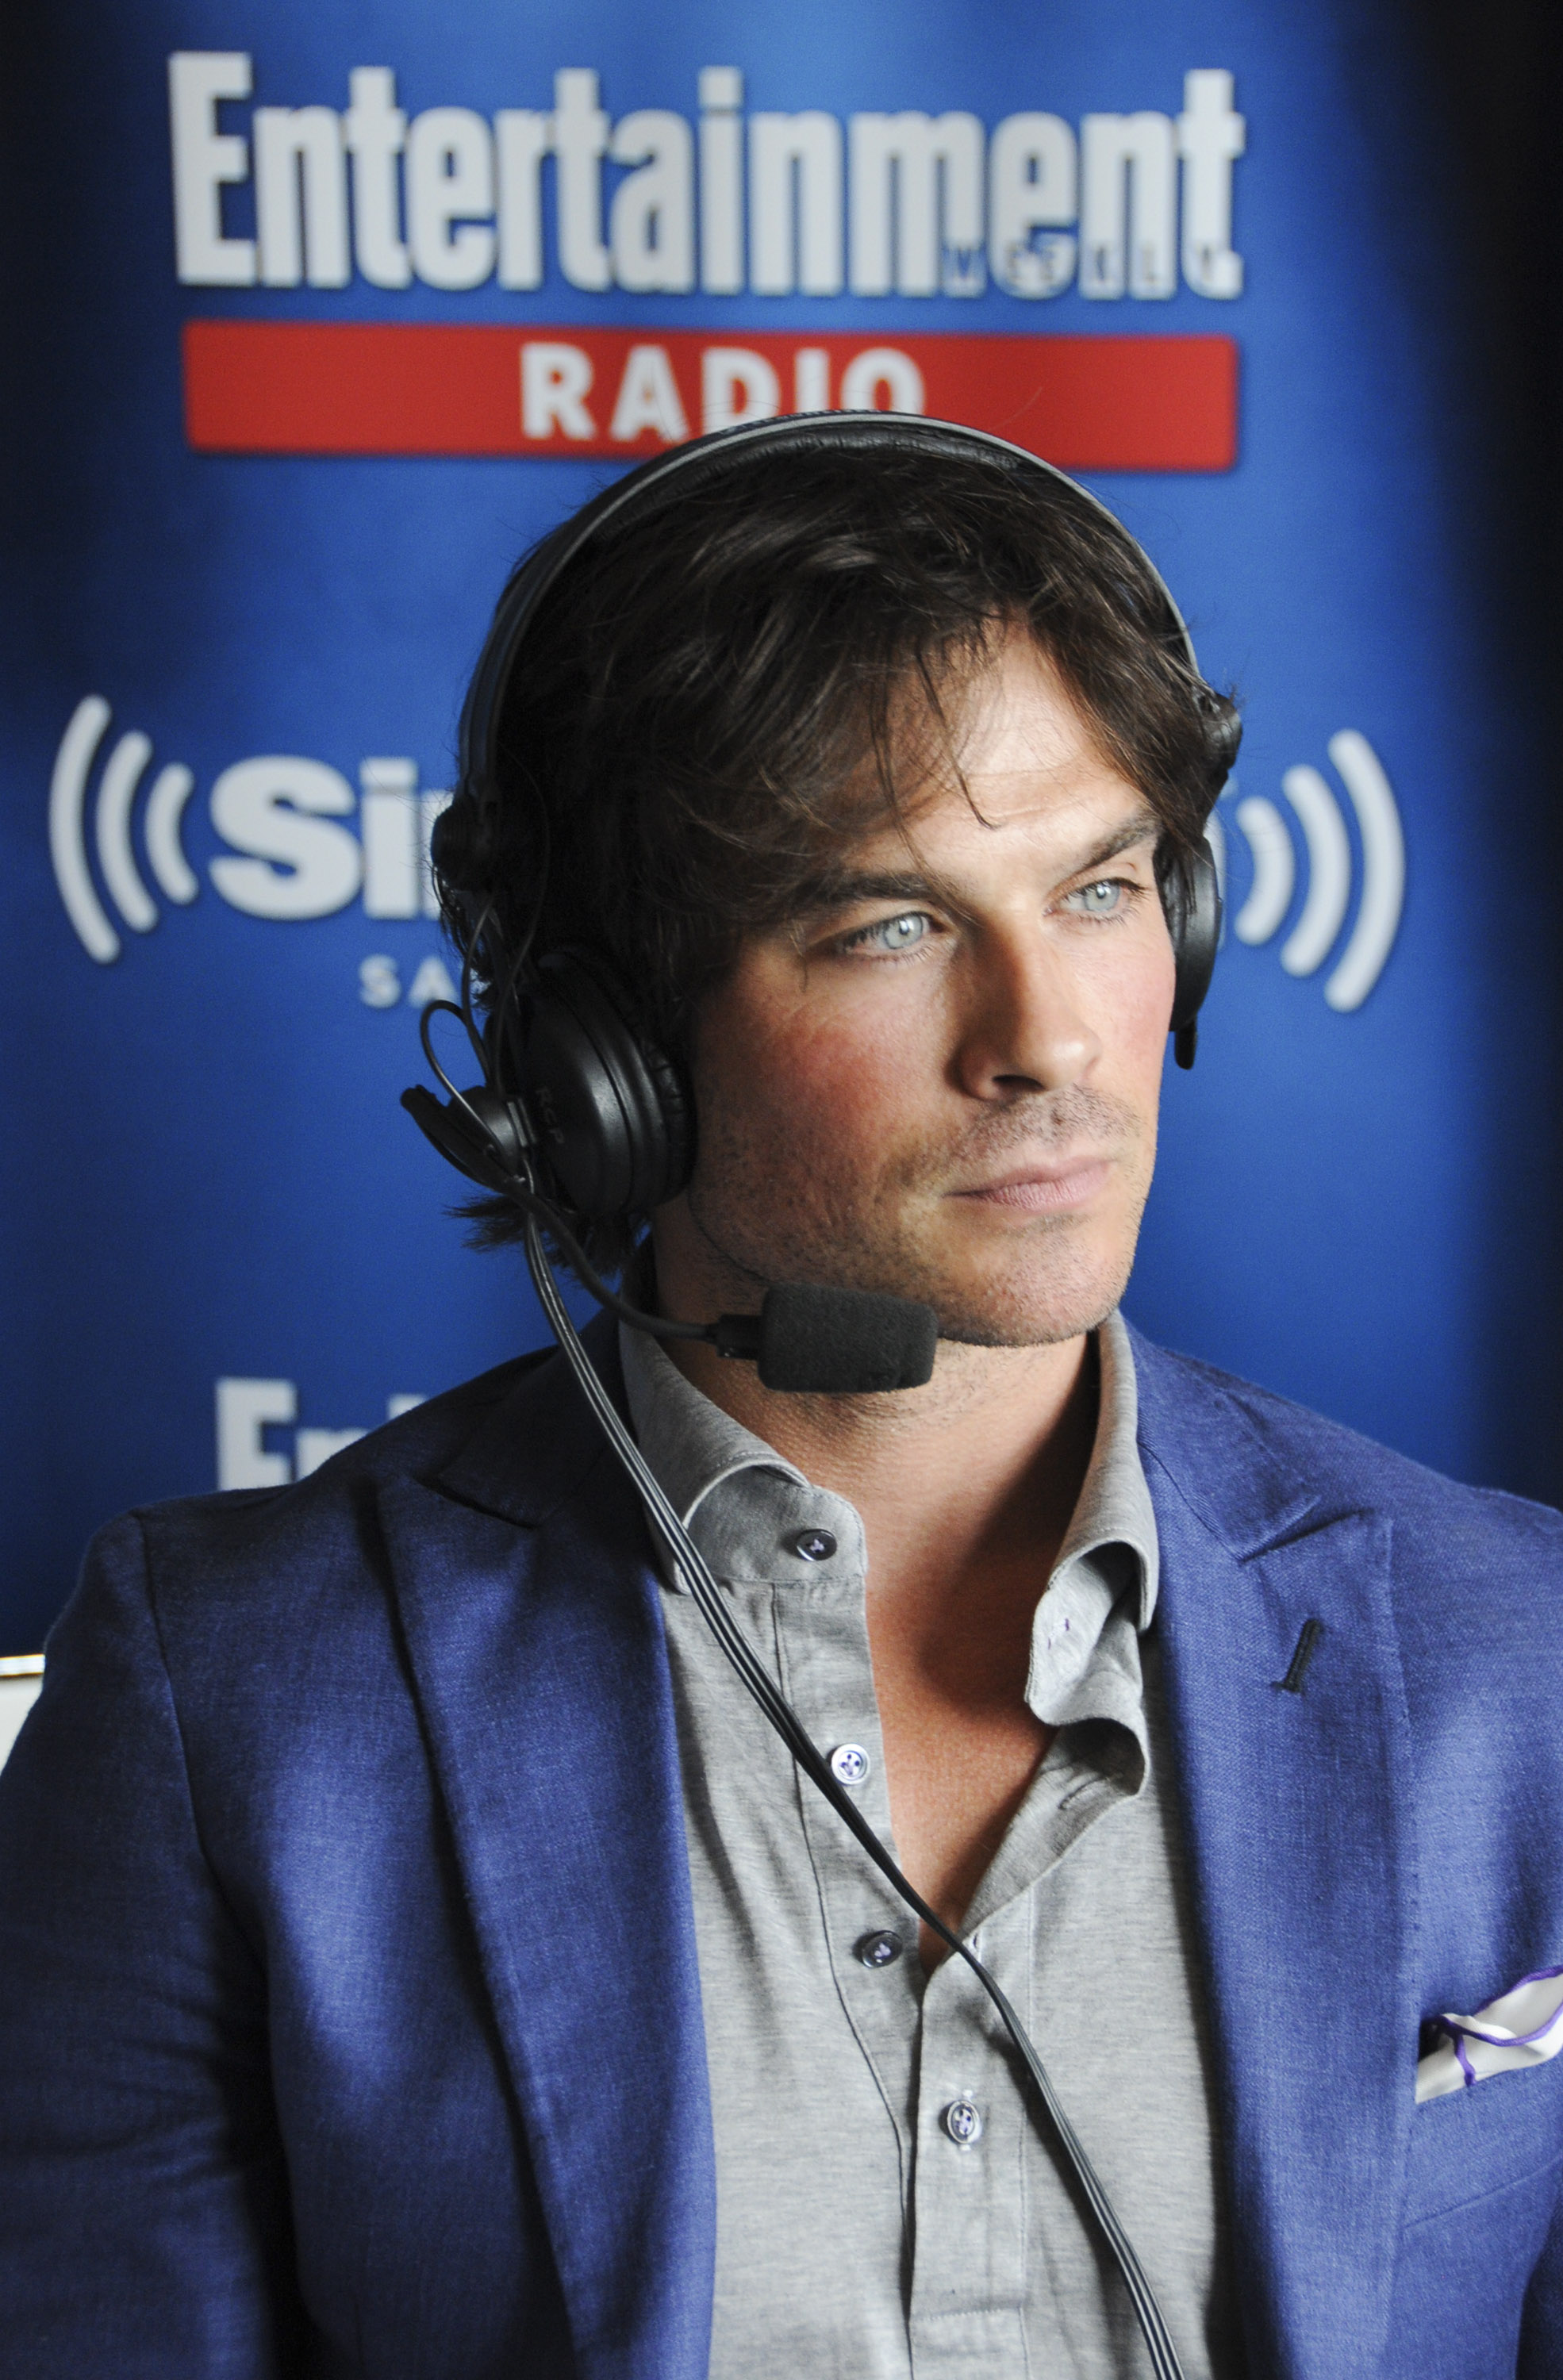 SAN DIEGO, CA - JULY 11: Actor Ian Somerhalder attends SiriusXM's Entertainment Weekly Radio Channel Broadcasts From Comic-Con 2015 at Hard Rock Hotel San Diego on July 11, 2015 in San Diego, California. (Photo by Vivien Killilea/Getty Images for SiriusXM)